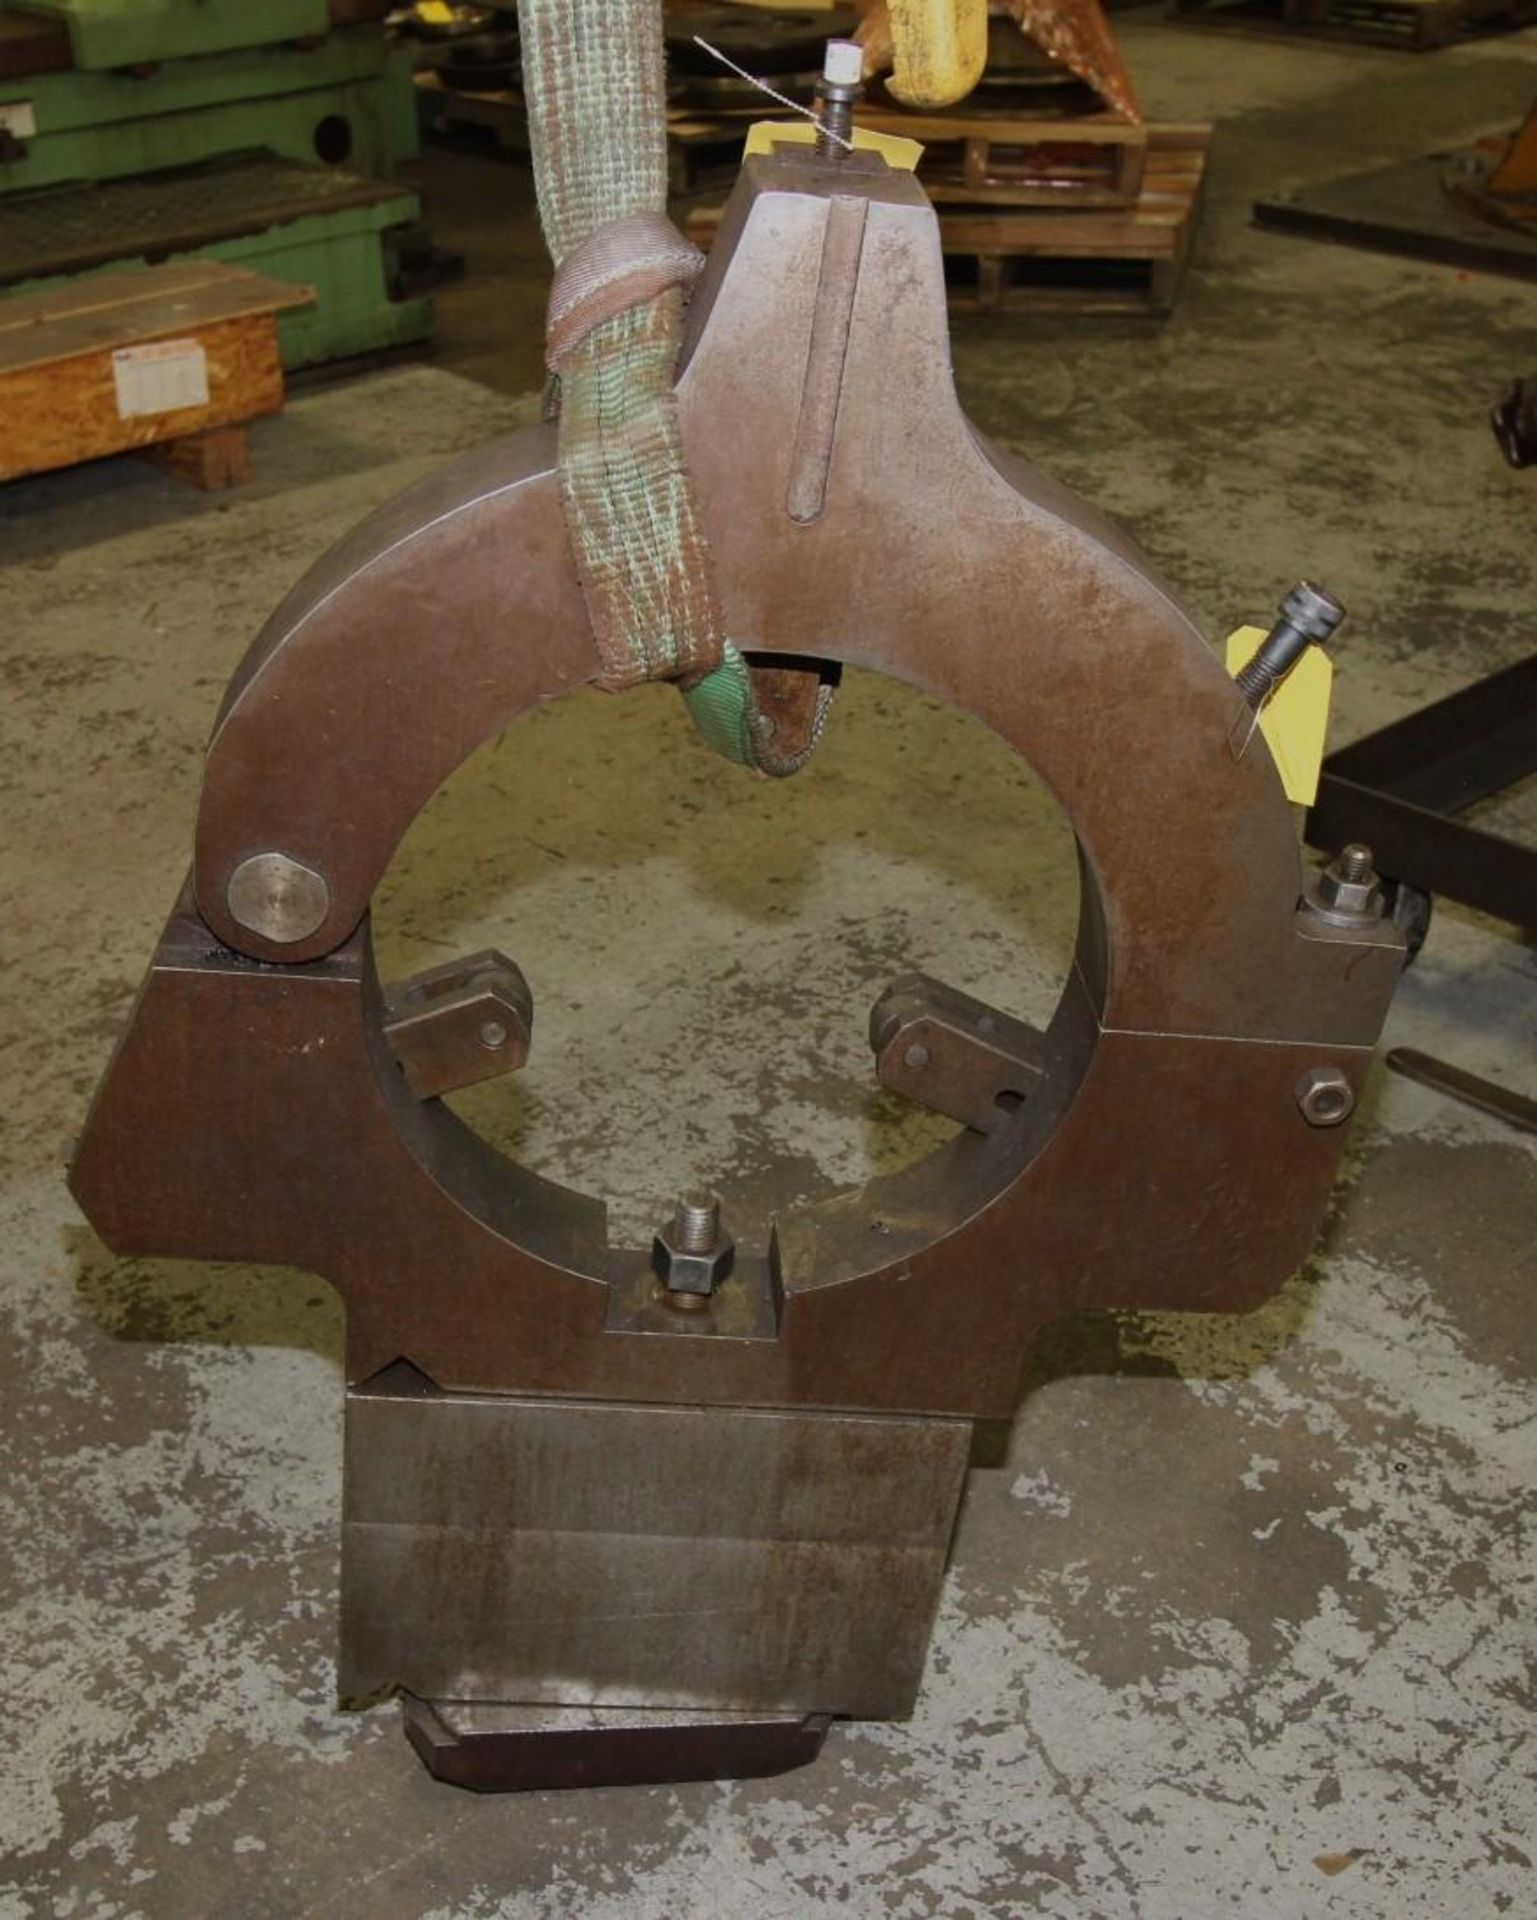 STEADYREST FOR KINGSTON MDL. HR3000, HR4000 LATHE, approx. 15" max. material dia. - Image 2 of 2